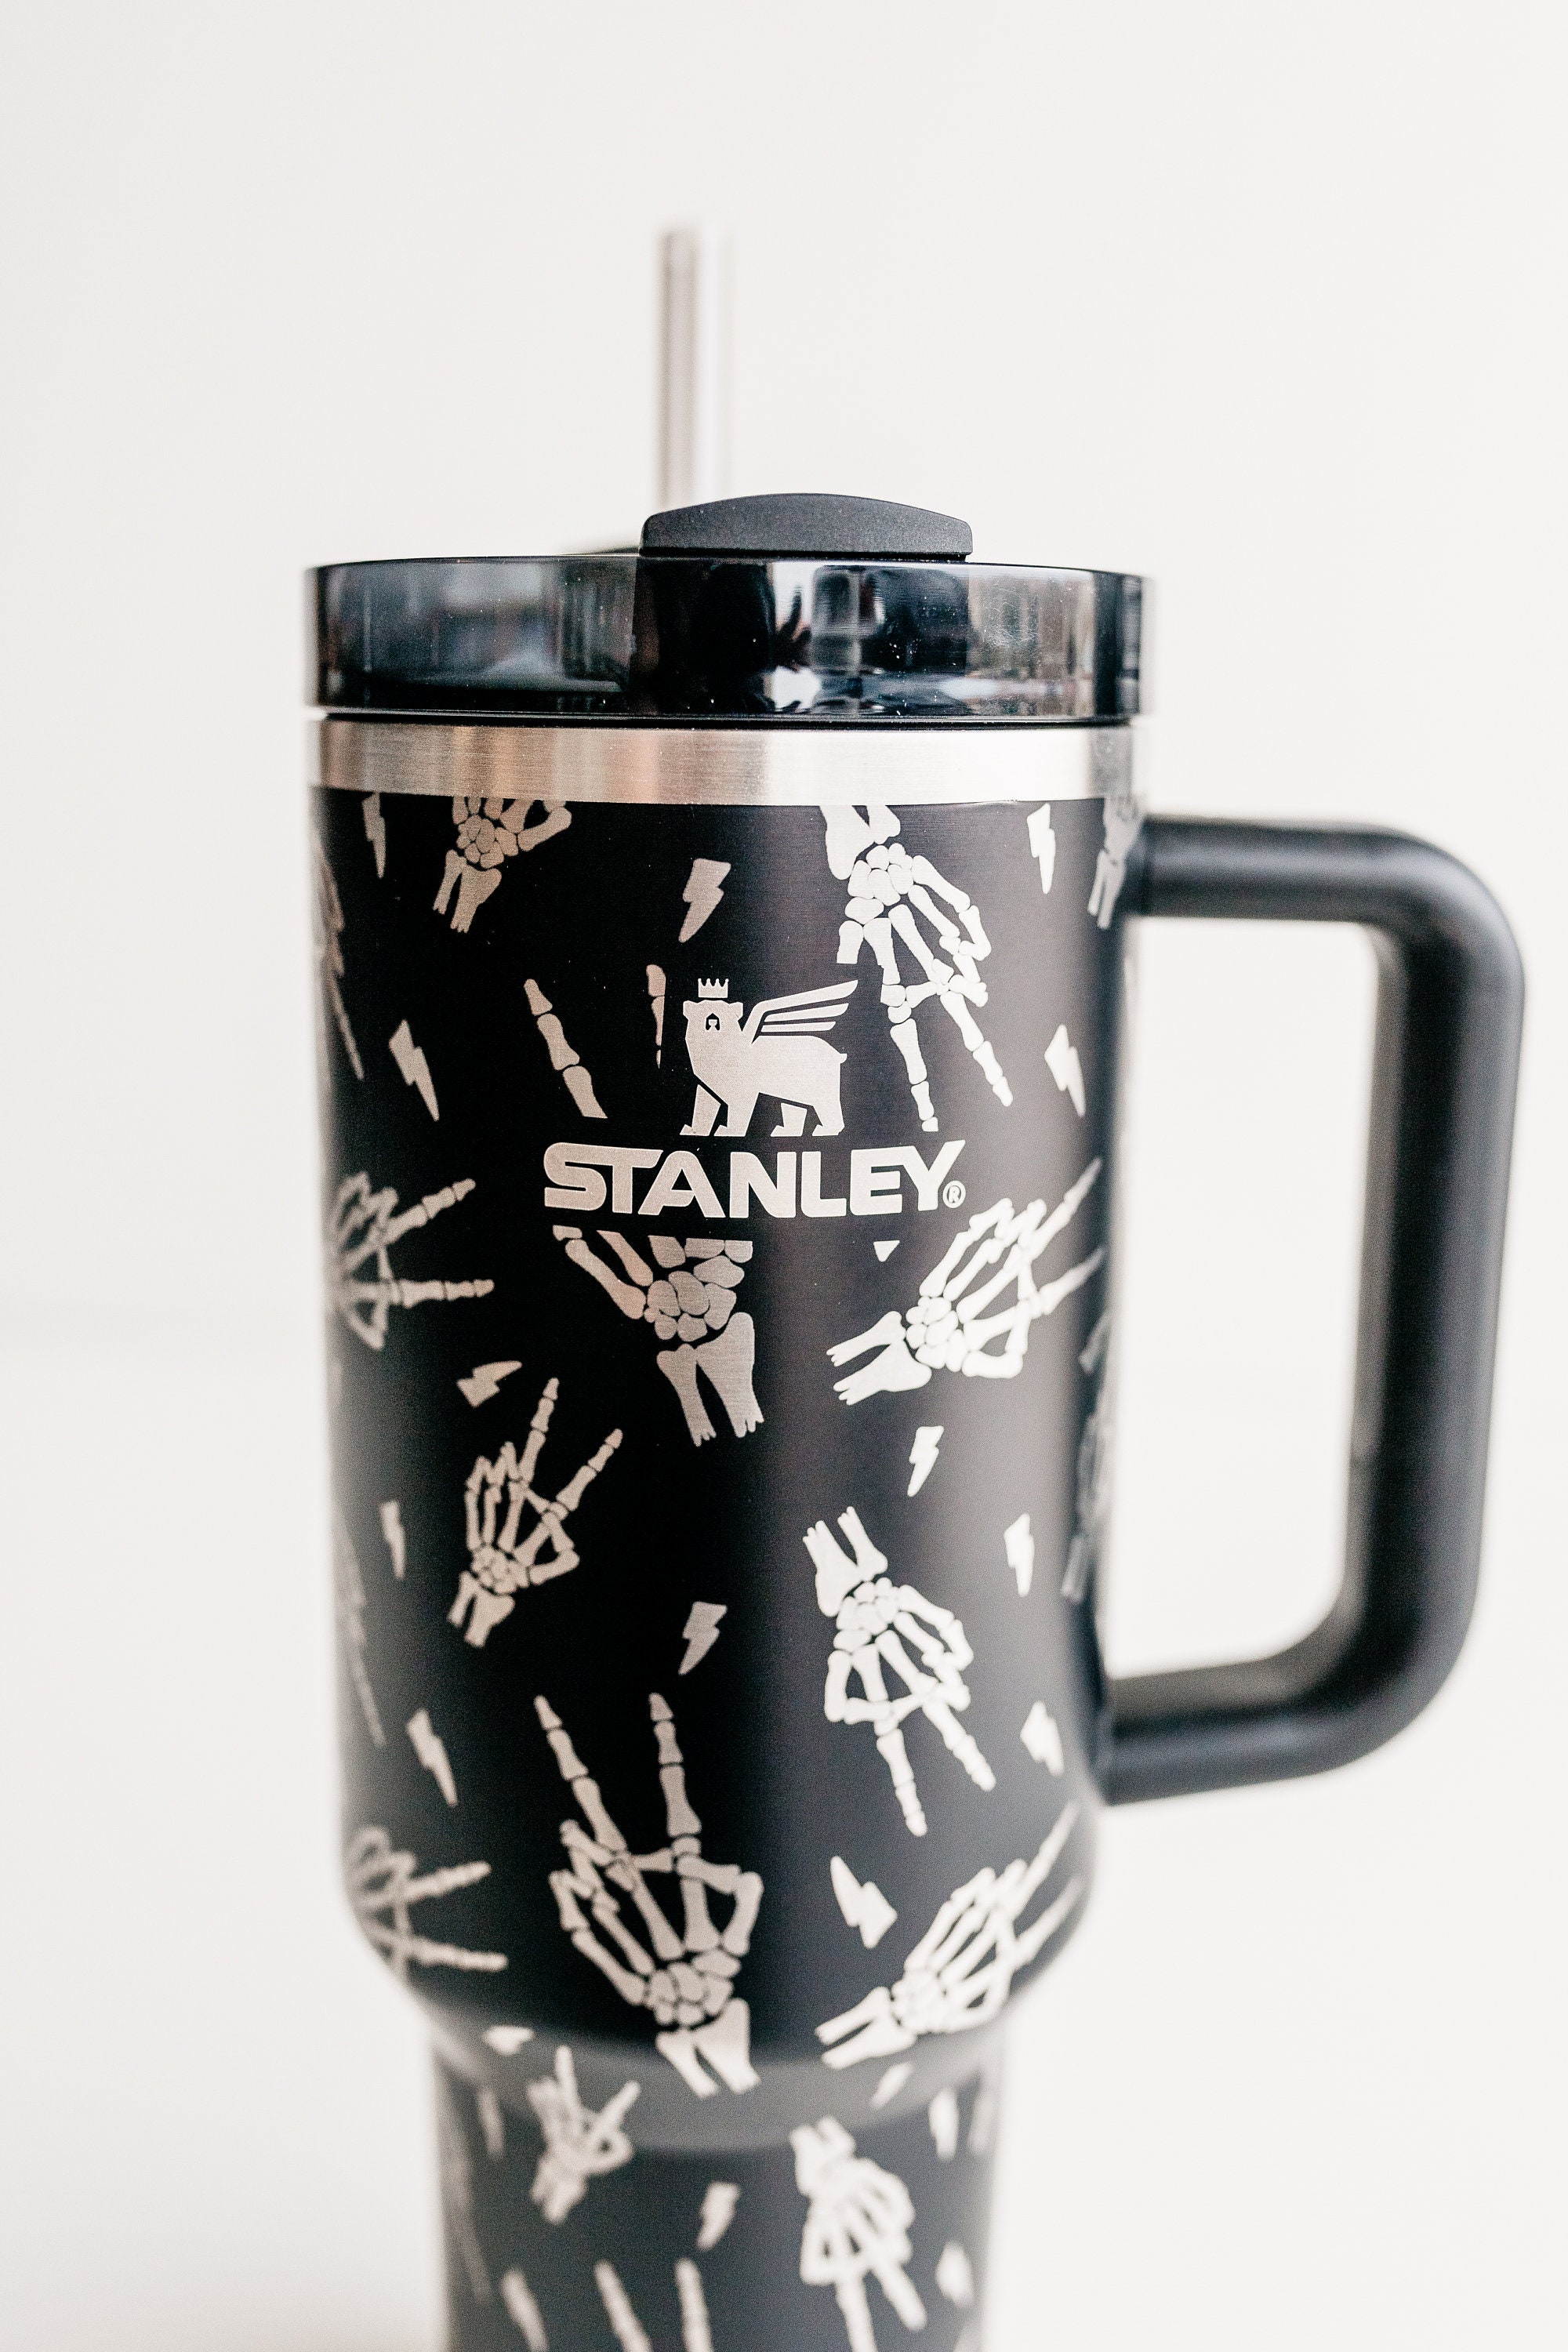 If You Own a Stanley Tumbler, You'll Want These Cool Accessories From